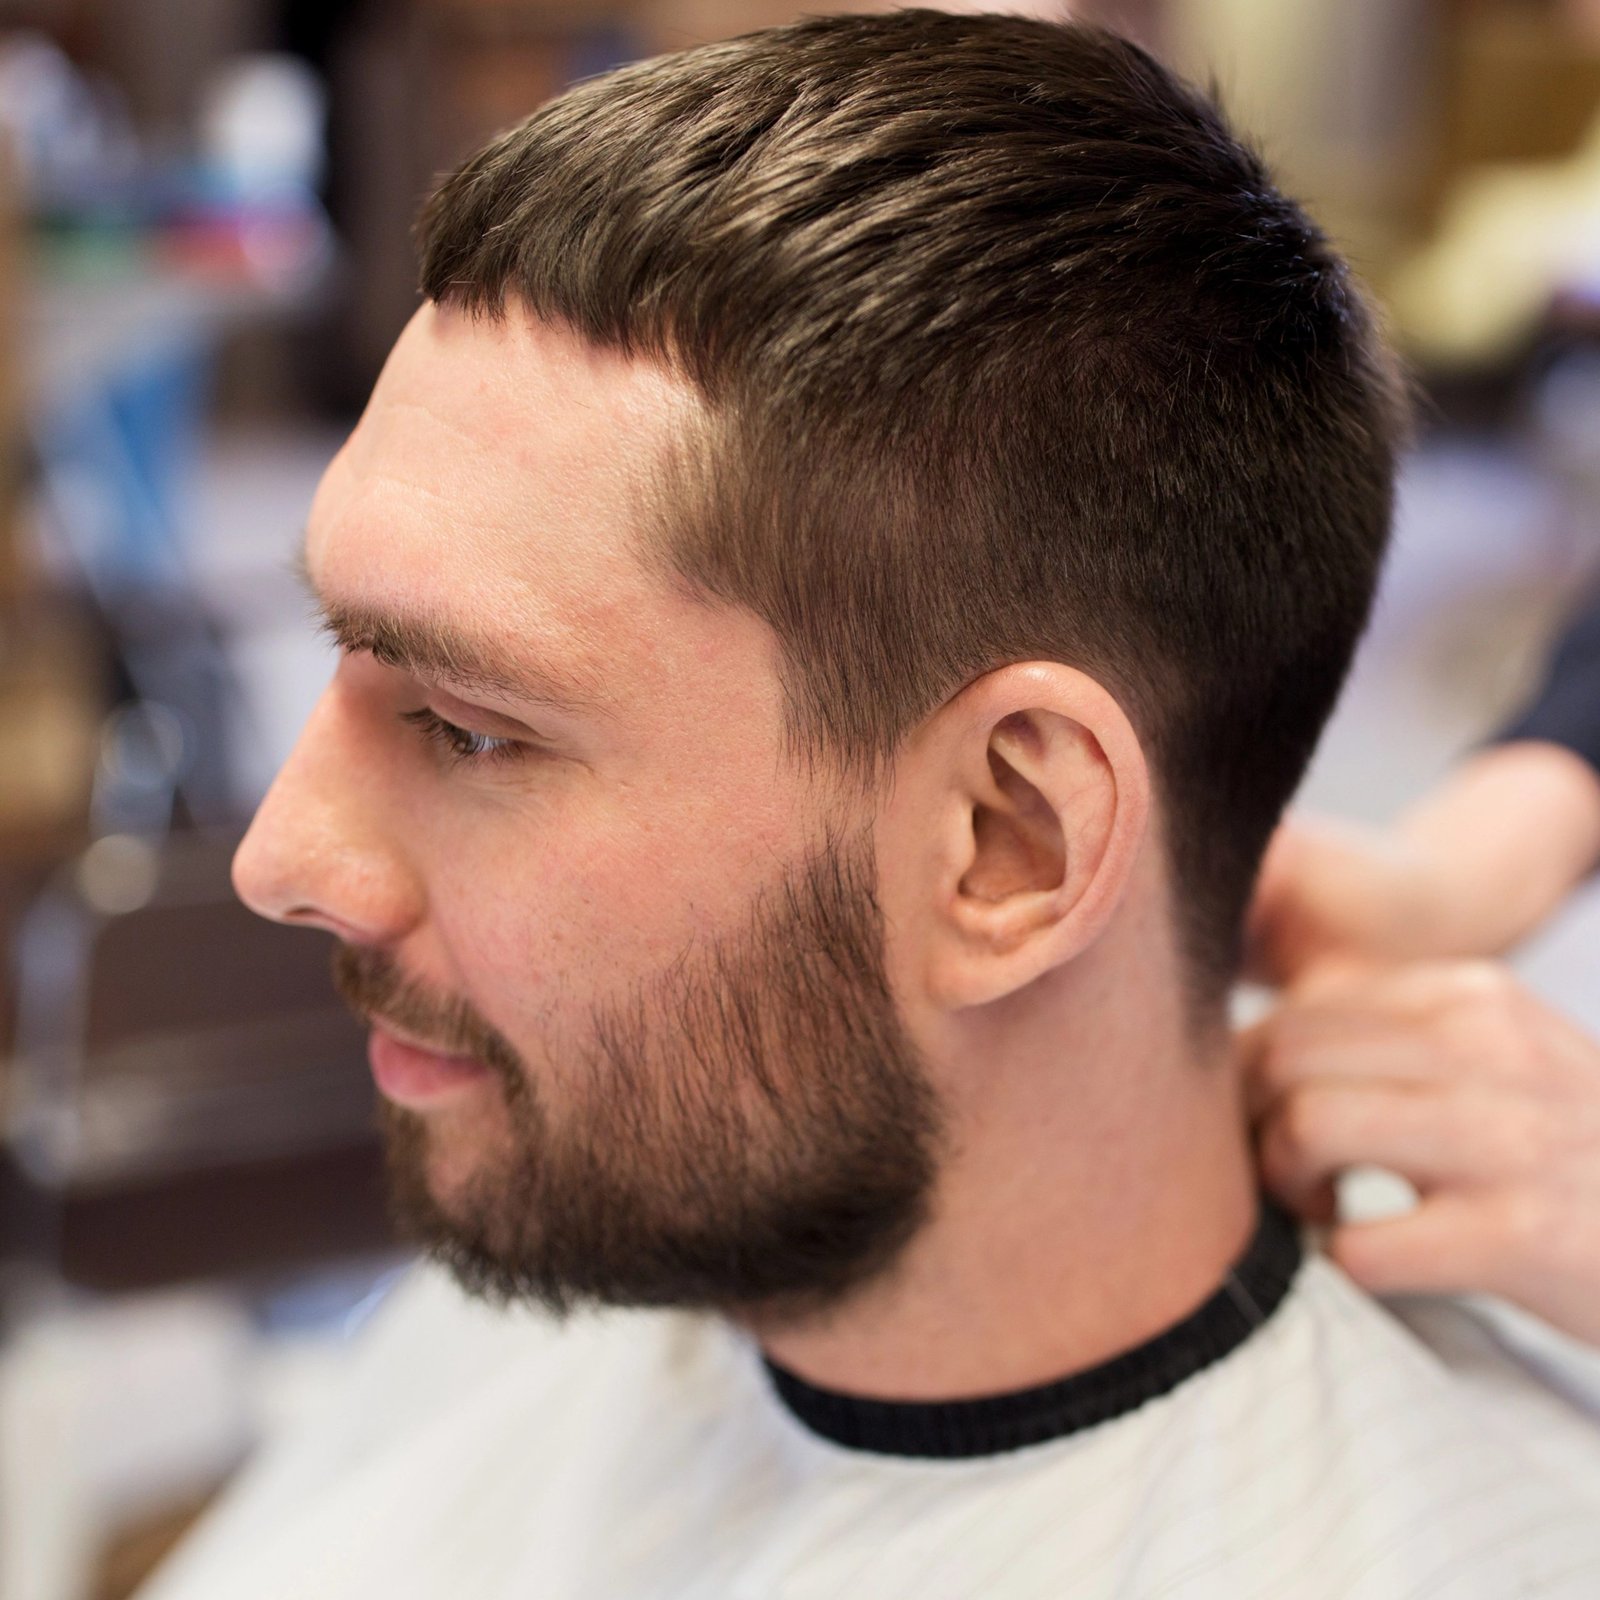 How to talk to your barber to get the perfect haircut you want?